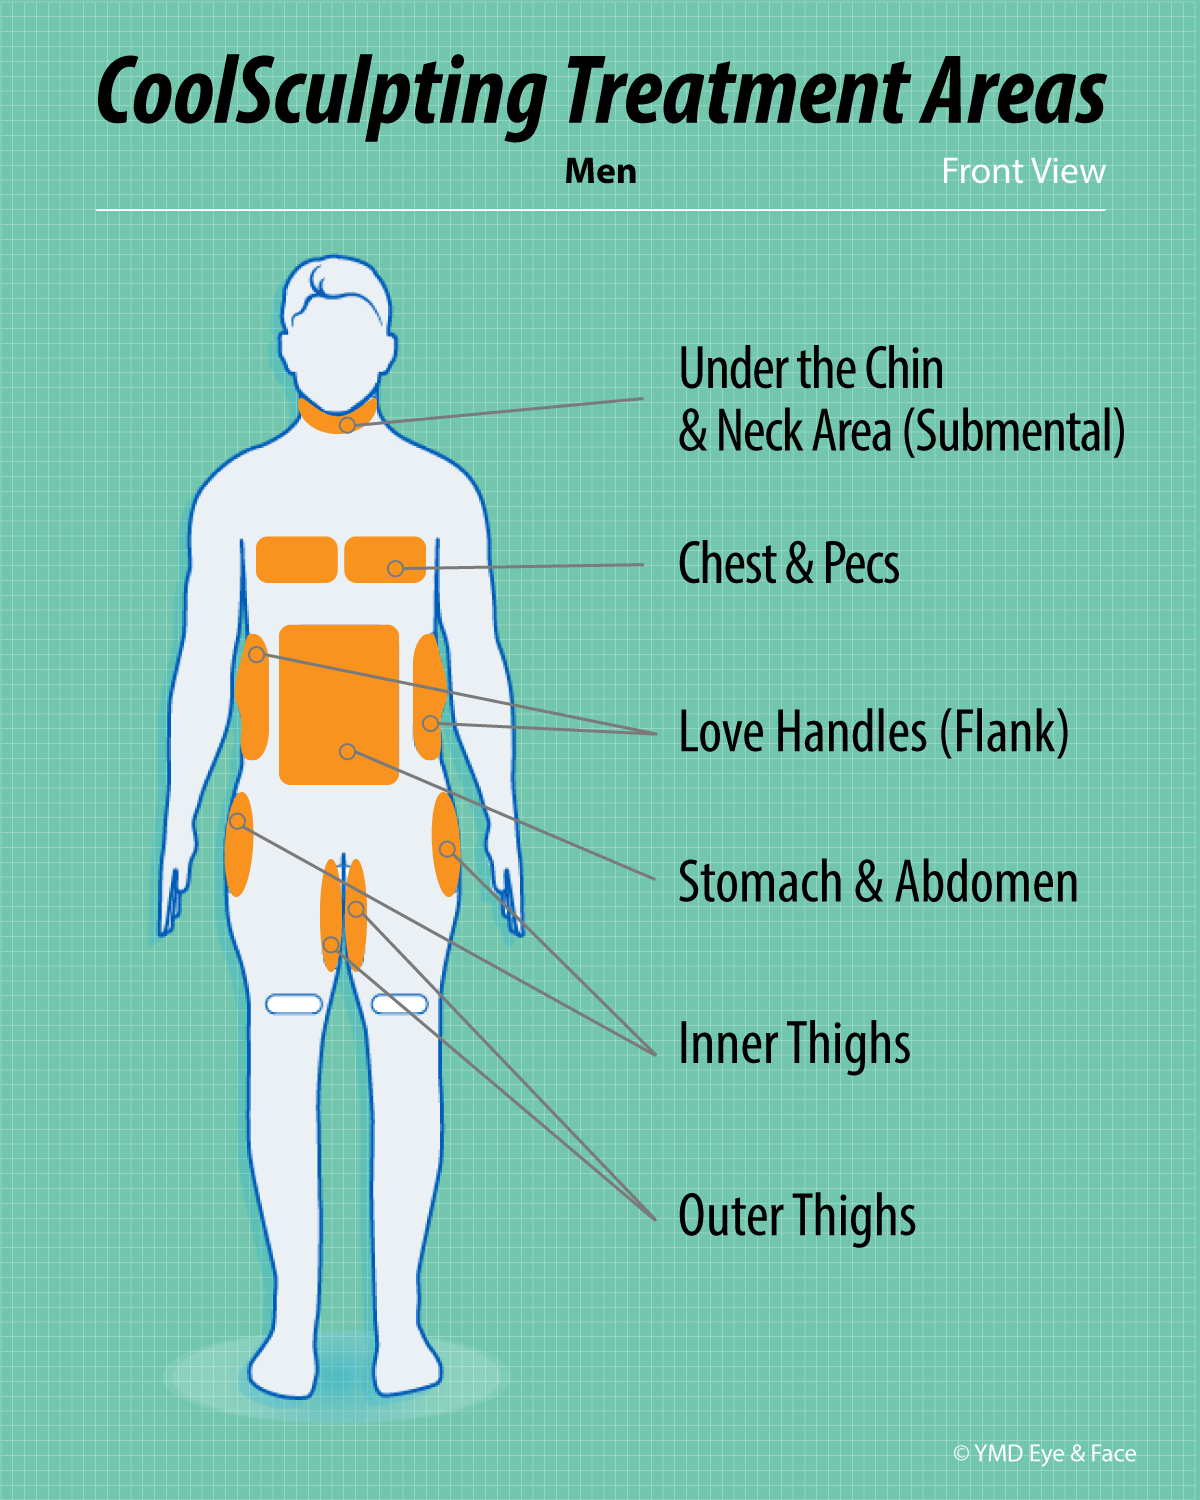 CoolSculpting graphic highlighting possible treatment areas for men (front view): under chin and neck area, chest (pectoral), love handles (flanks), stomach (abdomen), inner and outer thighs